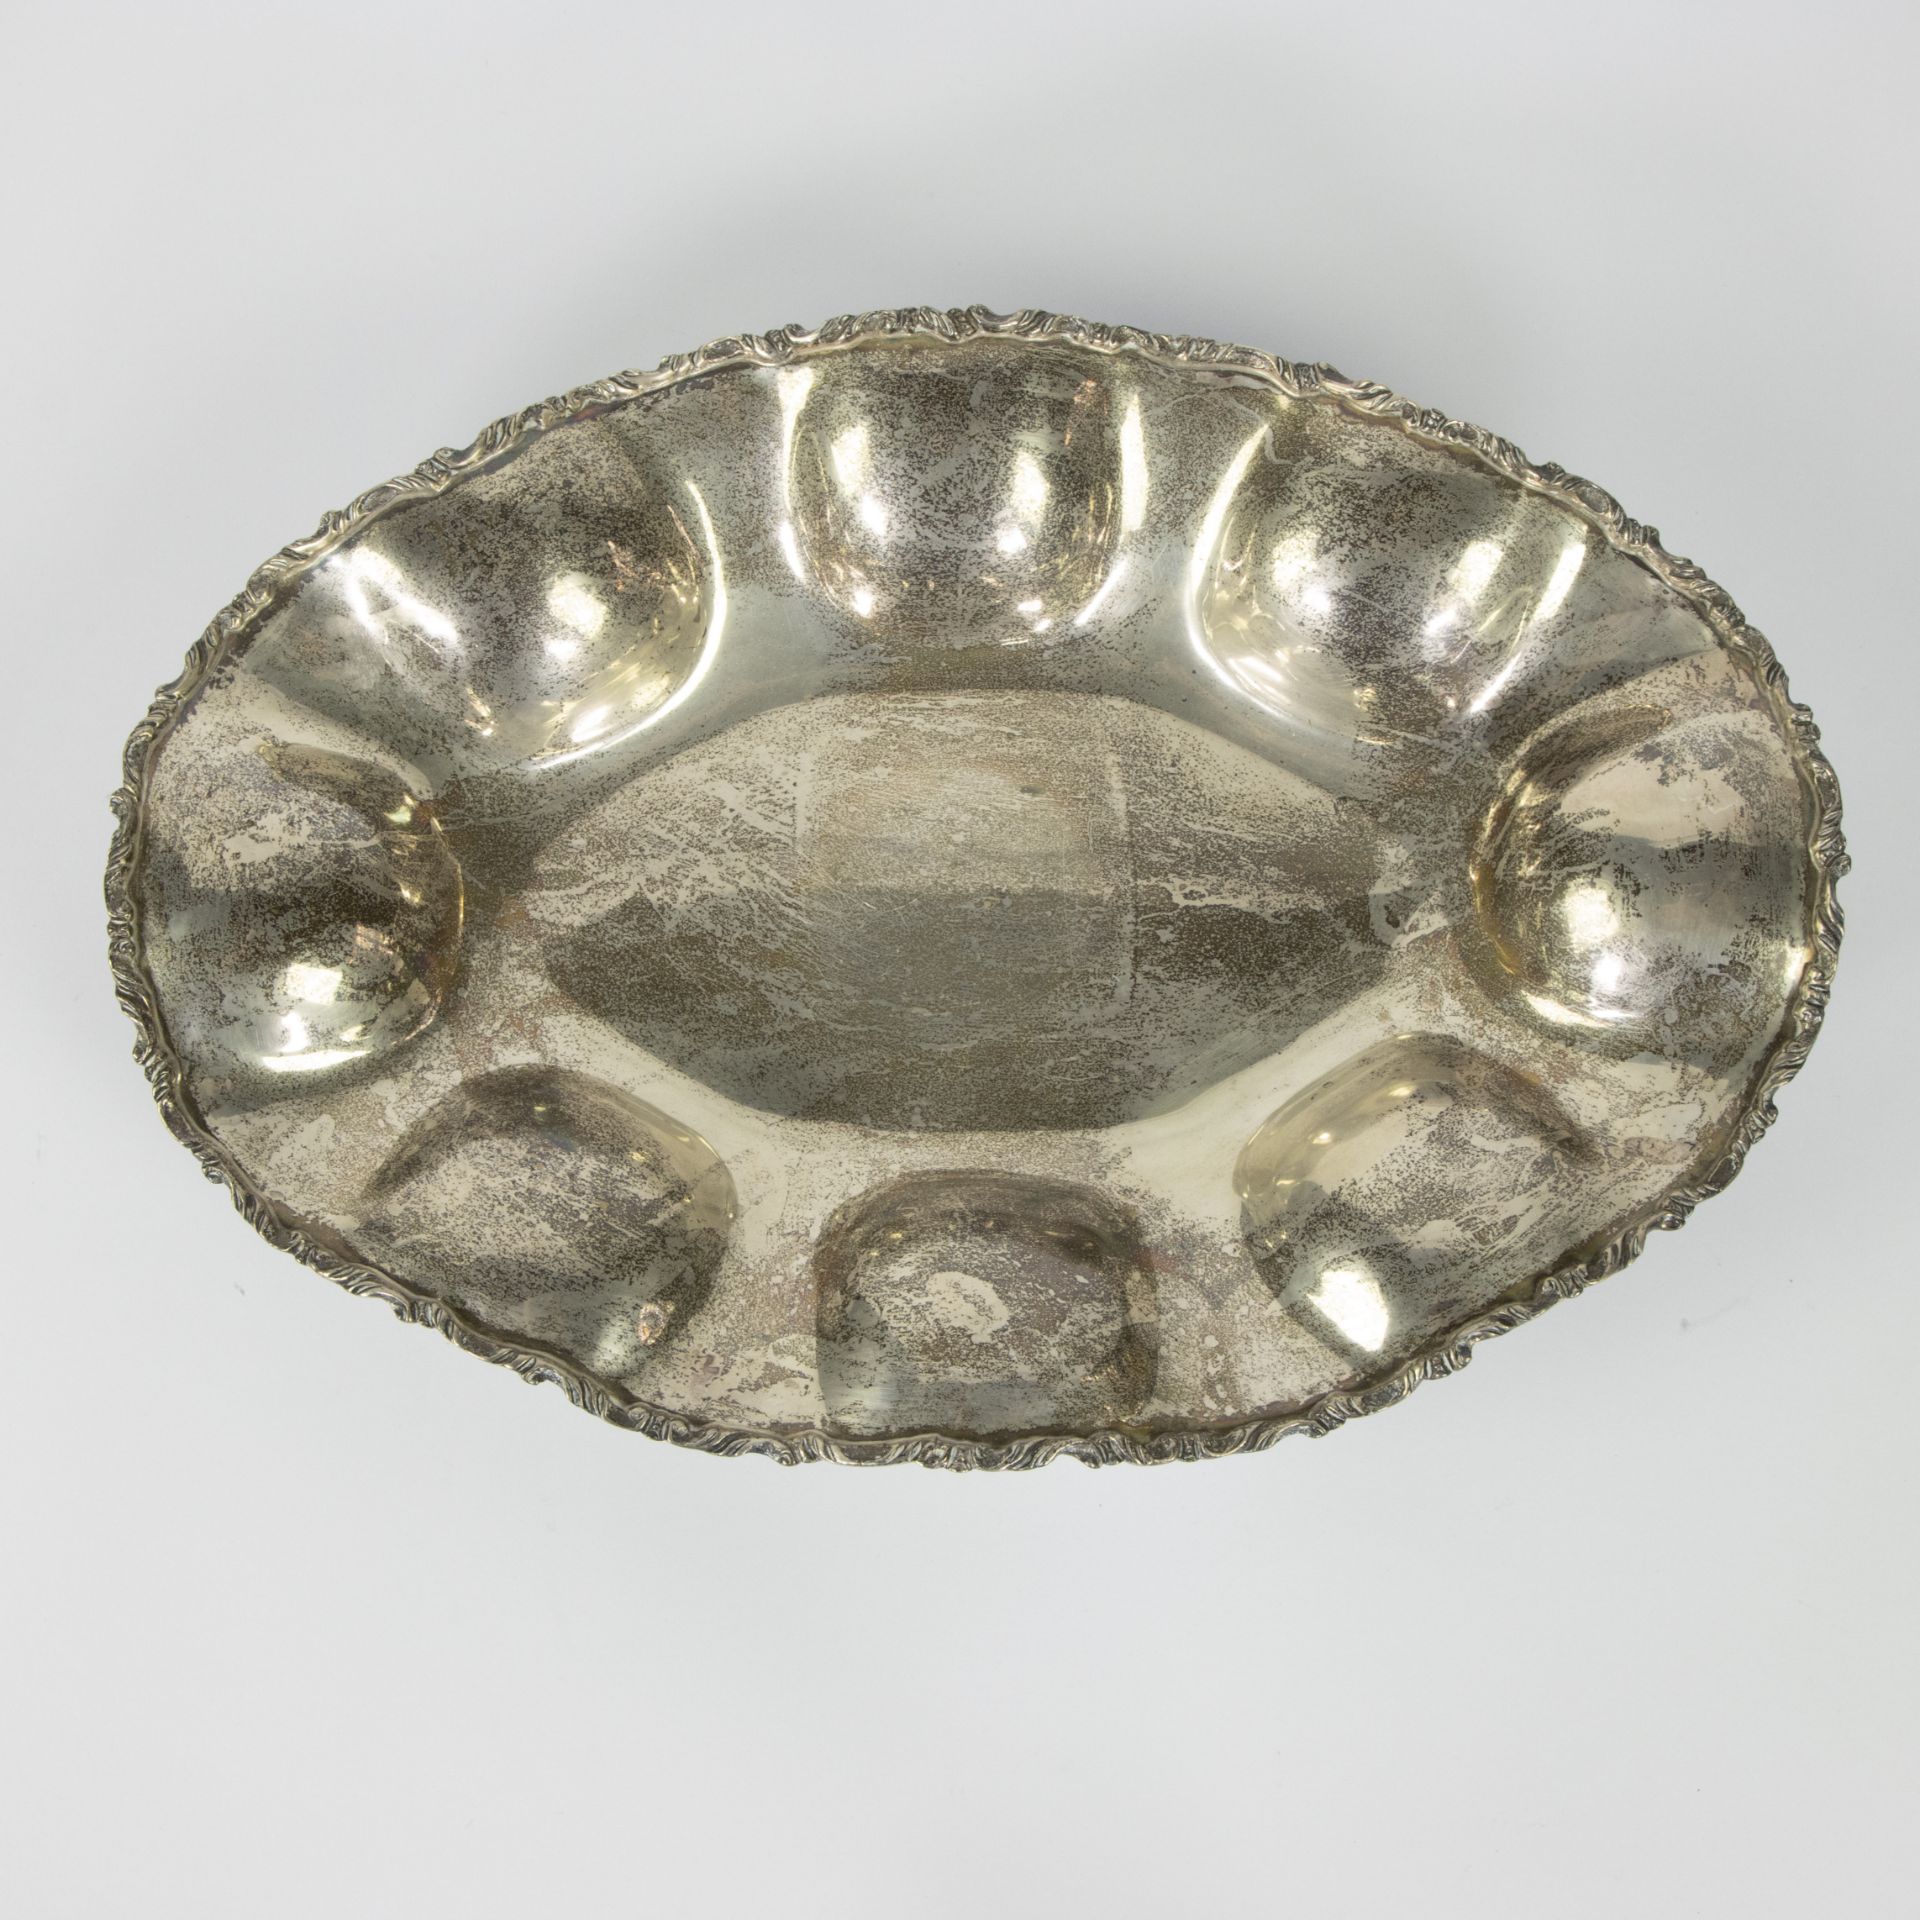 Silver bowl, Mexican content 925, 975 gram - Image 2 of 4